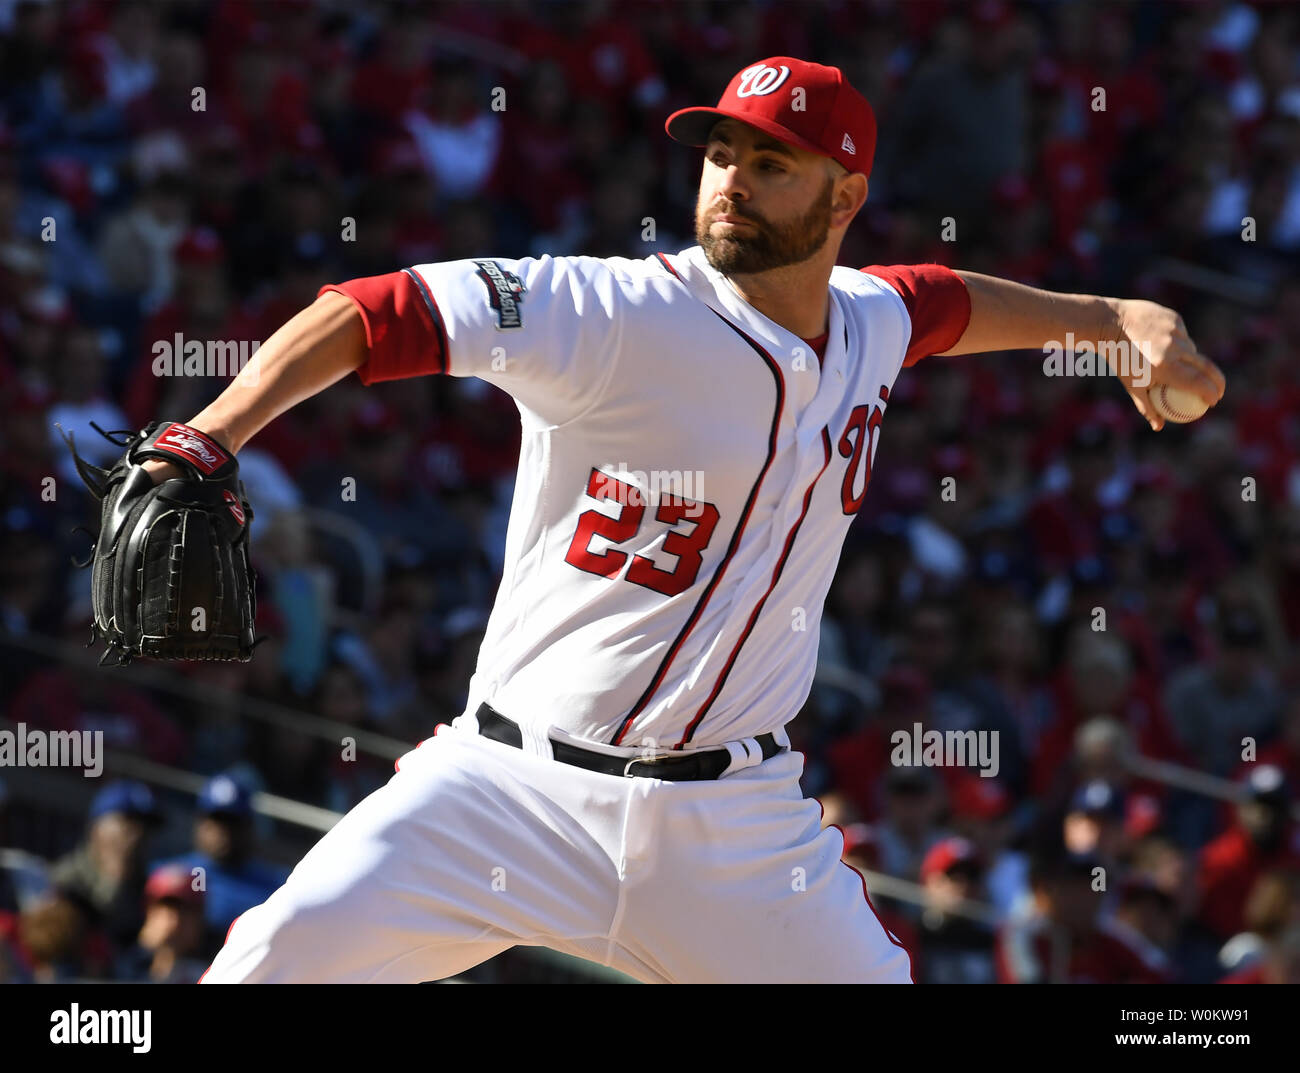 Washington Nationals relief pitcher Marc Rzepczynski throws in the sixth inning against the Los Angeles Dodgers in game 2 of the National League Division Series at Nationals Park in Washington, D.C., October 9, 2016. Los Angeles leads the series 1-0 over Washington.   Photo by Pat Benic/UPI Stock Photo